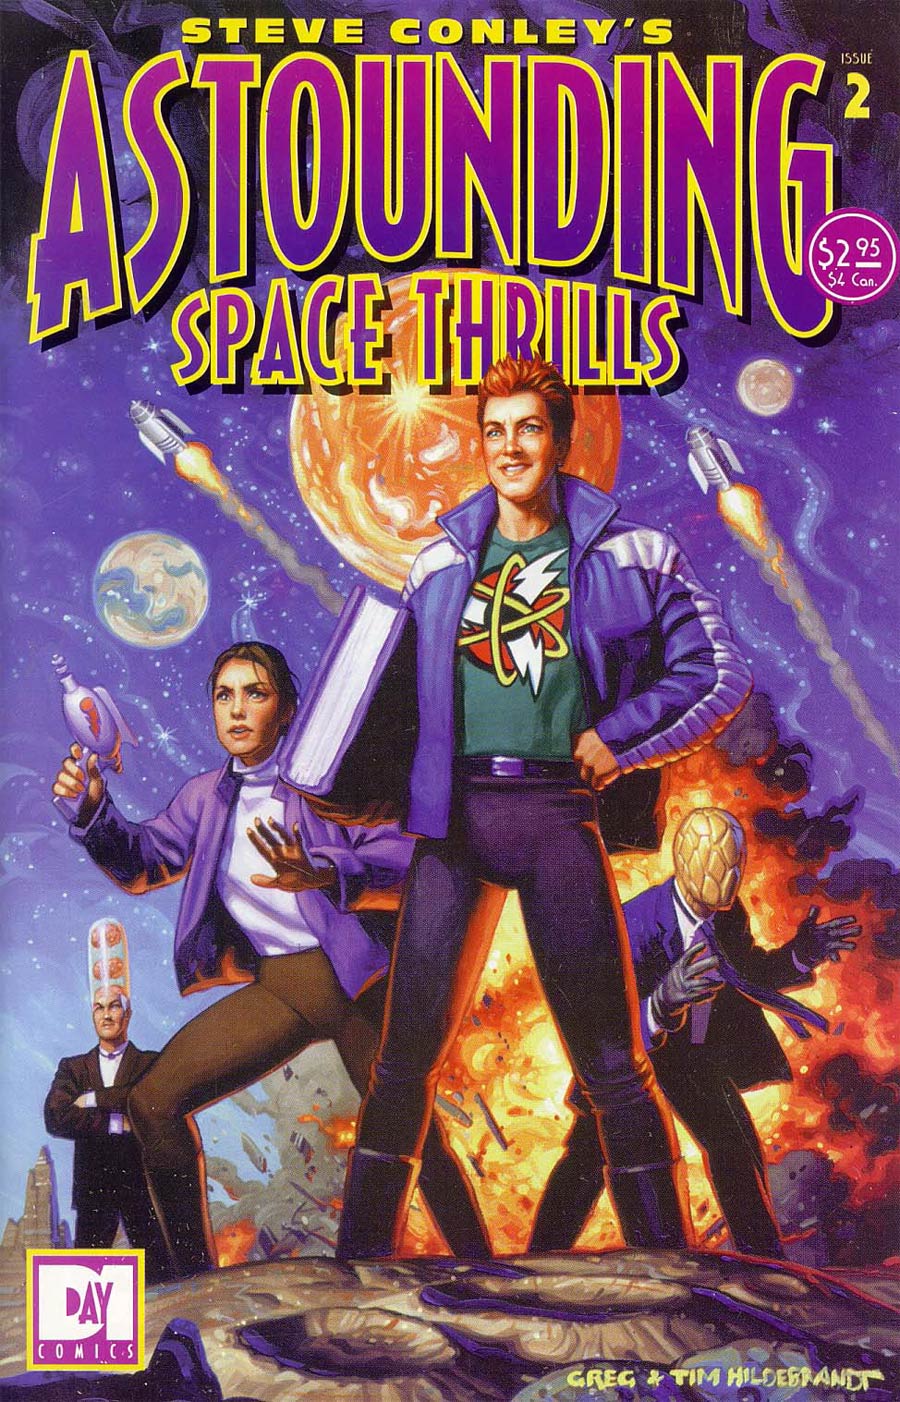 Astounding Space Thrills (1998) #2 Cover A Regular Cover